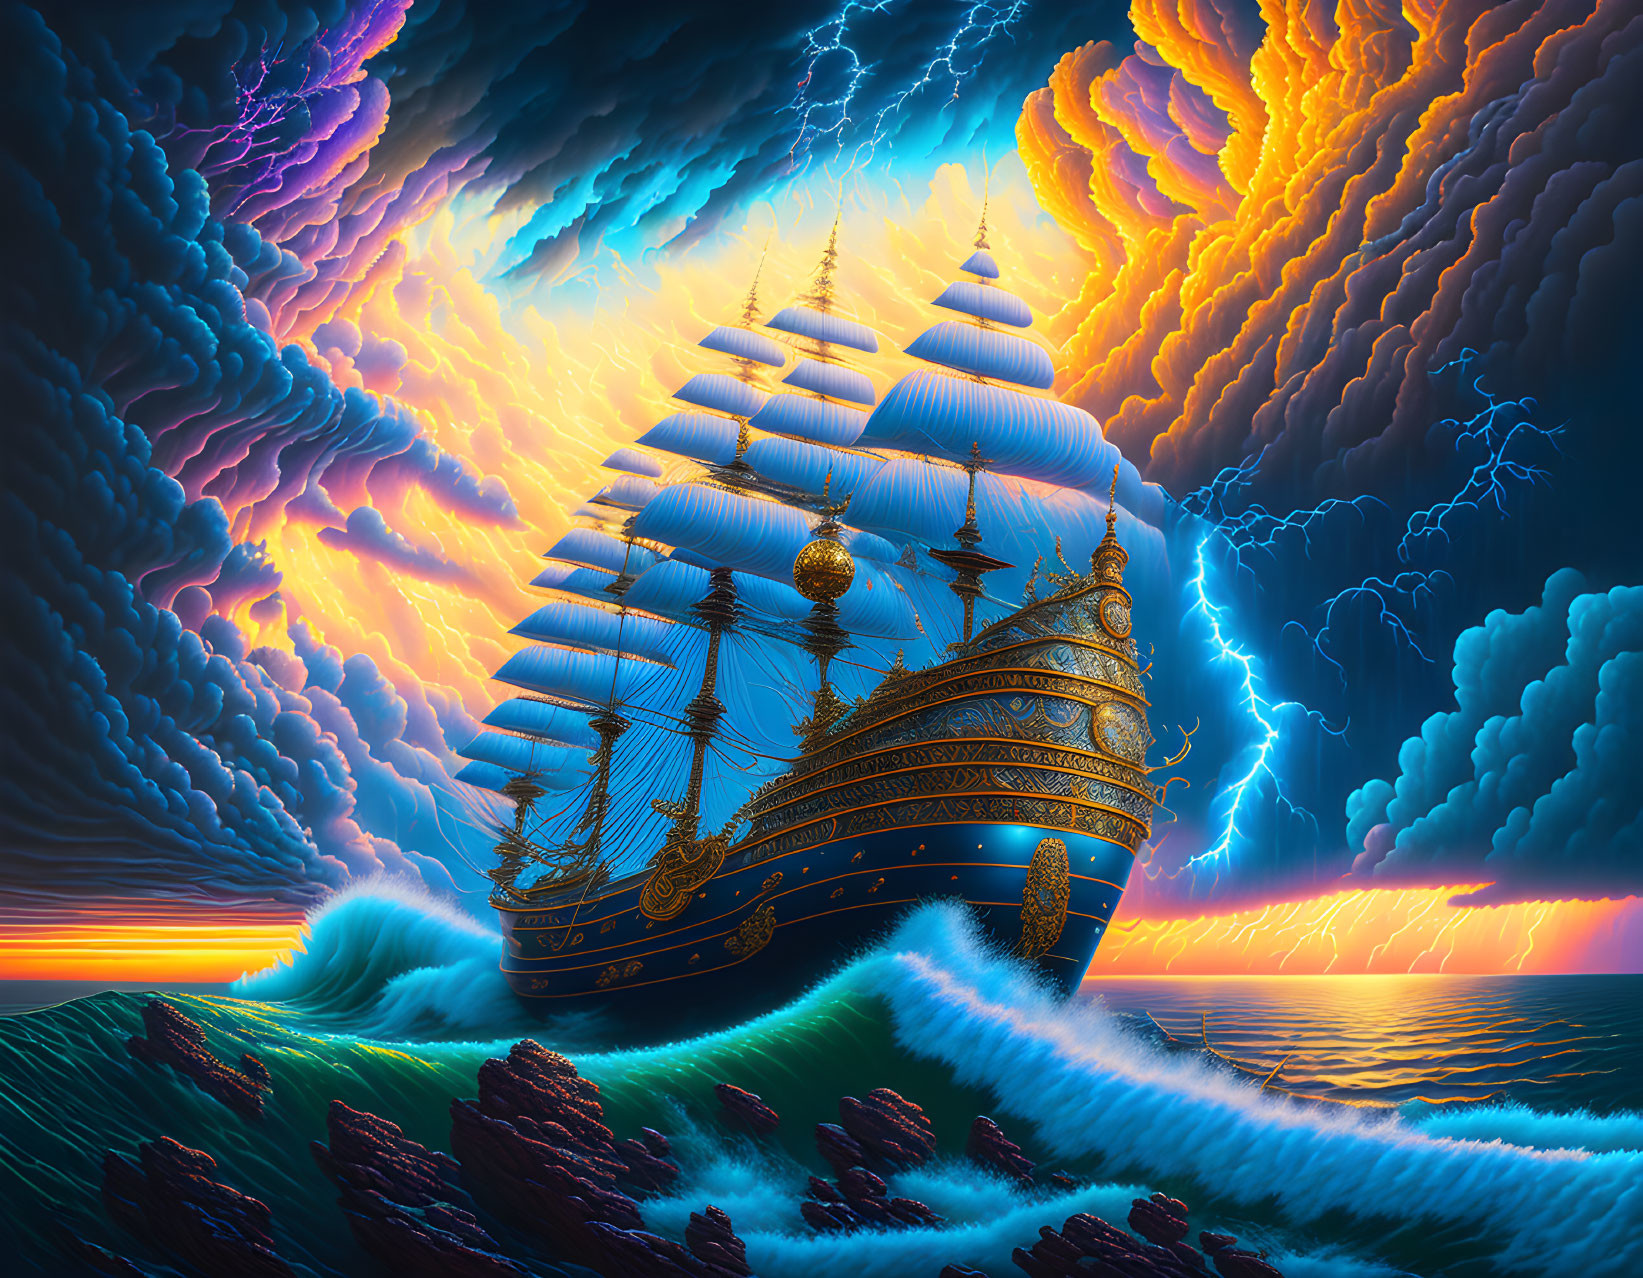 Surreal seascape with majestic sailing ship and vibrant sky